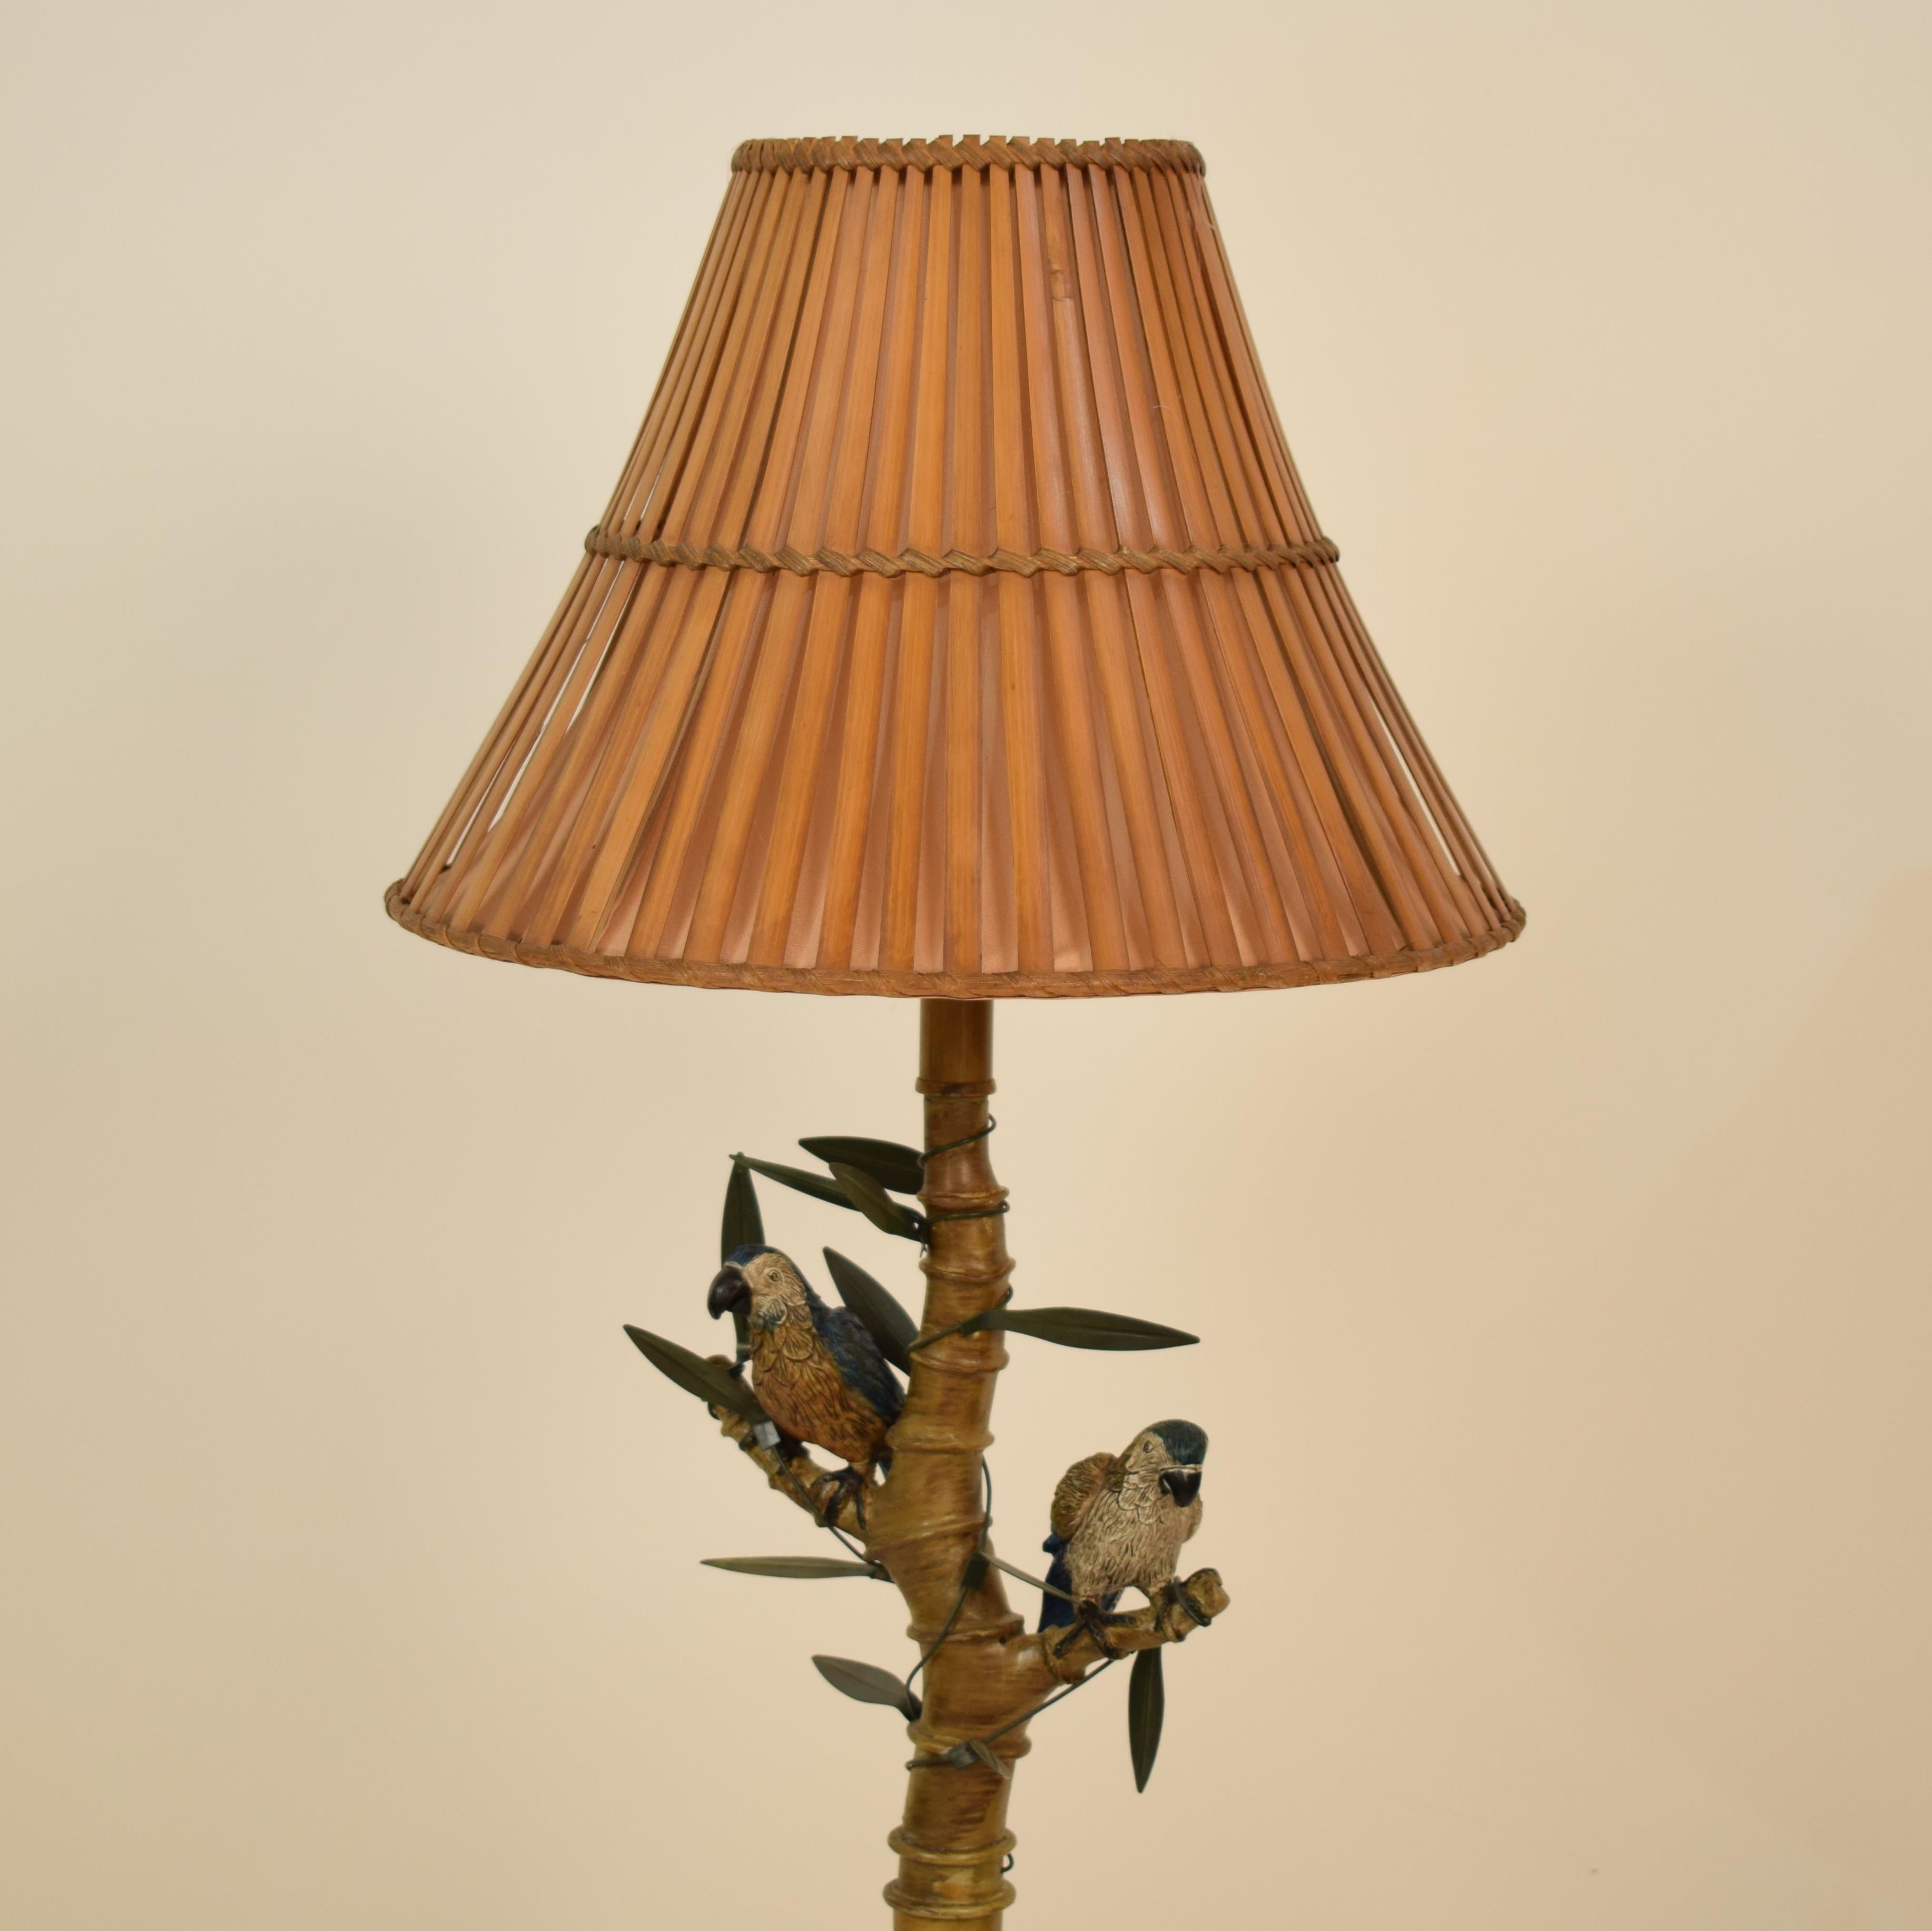 Resin Midcentury Italian Faux Bamboo Floor Lamp with Parrots and Bamboo Lamp Shade